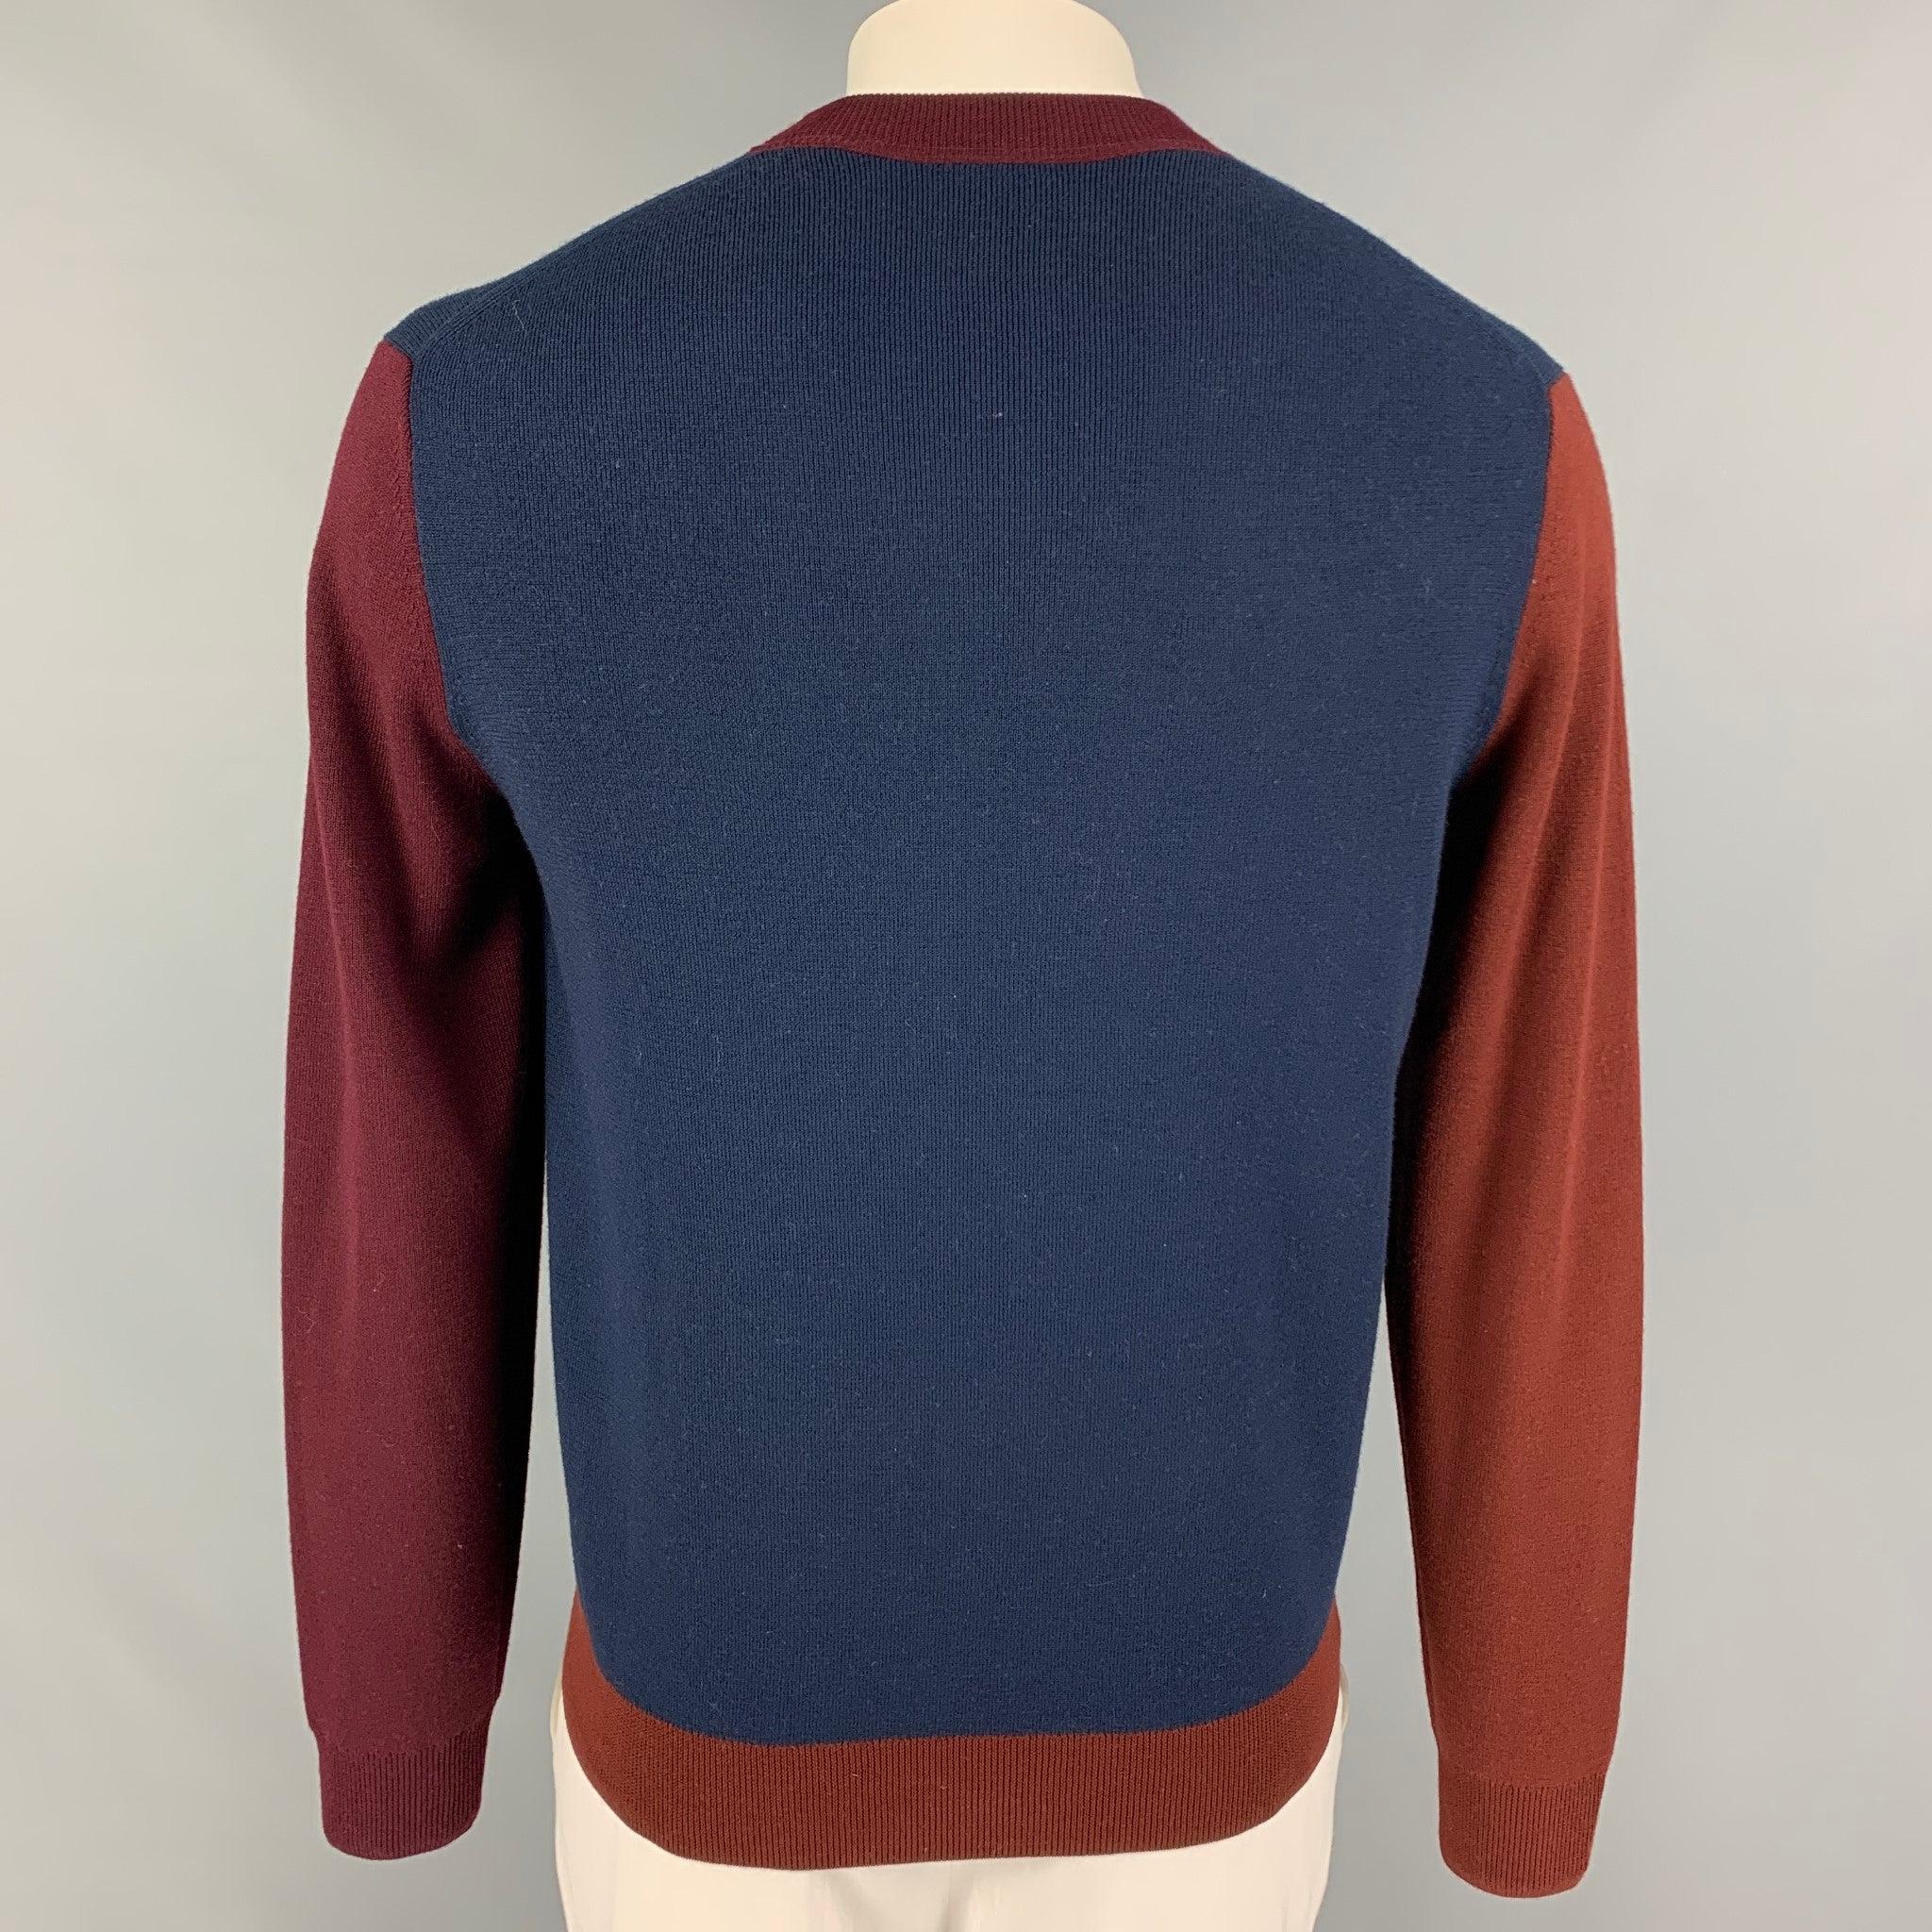 PAUL SMITH Size M Navy Burgundy Color Block Merino Wool Crew-Neck Sweater In Good Condition For Sale In San Francisco, CA